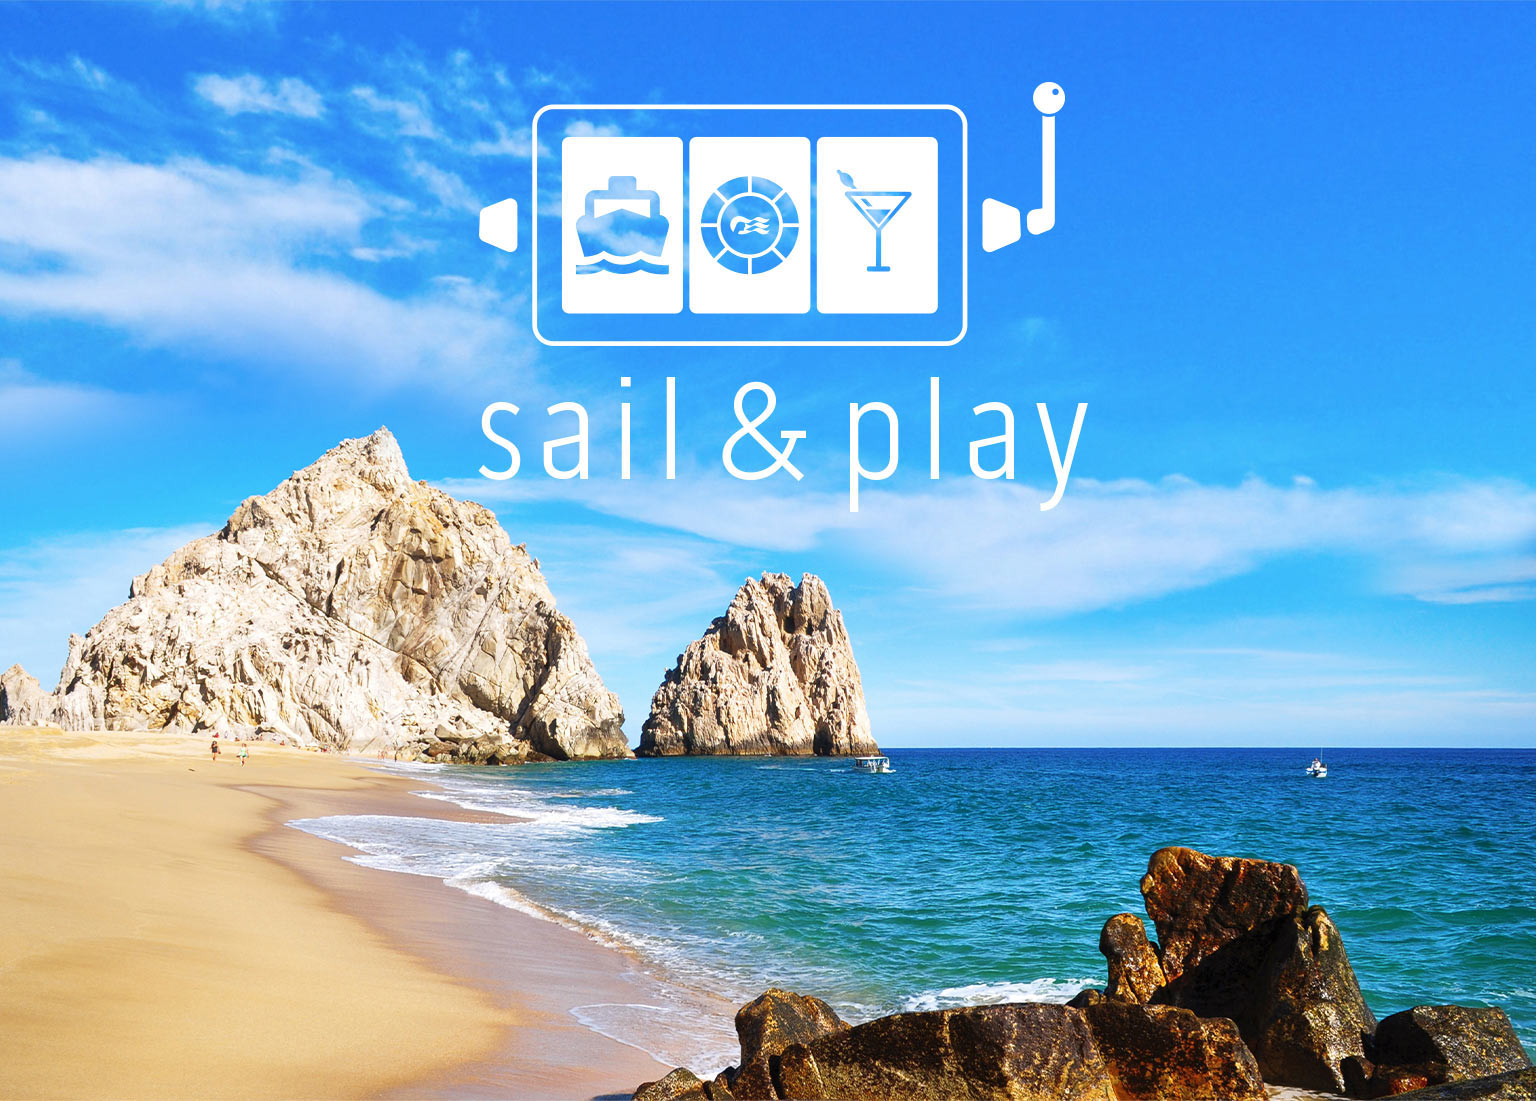 Click here to view all Mexico sailings included in this Sail & Play offer